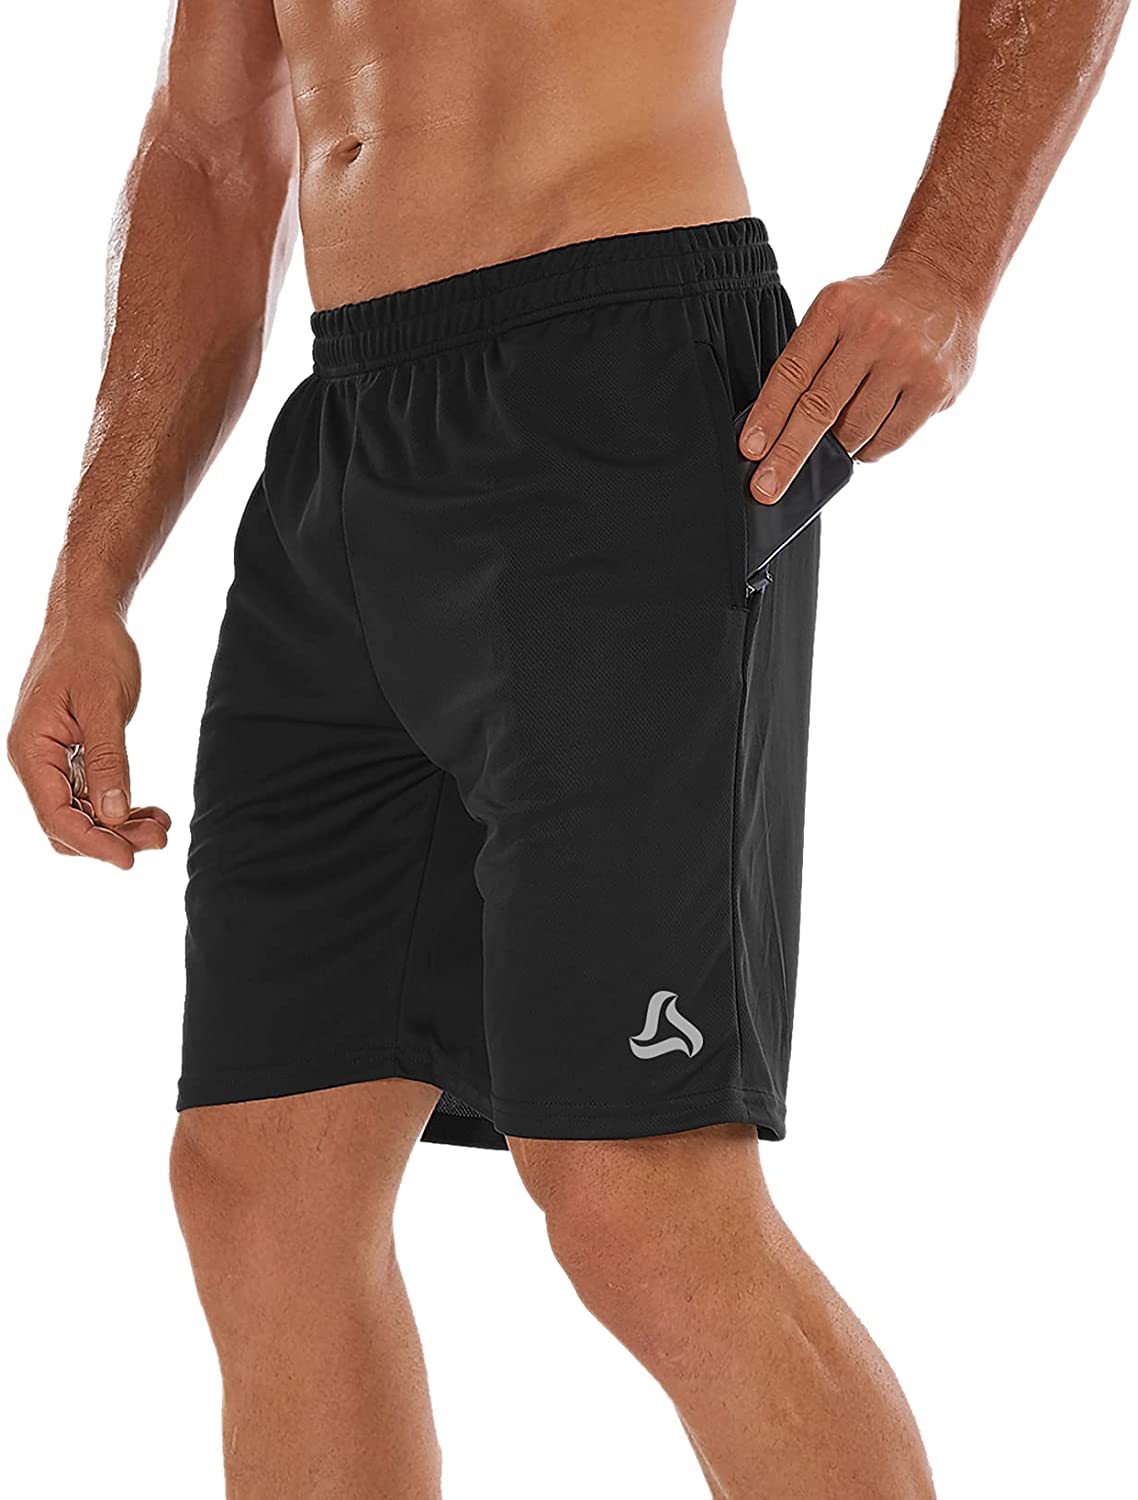 Pack of 1,2,3 SILKWORLD Men's 7 Running Athletic Shorts Lightweight Mesh Gym Workout Shorts with Zip Pockets 